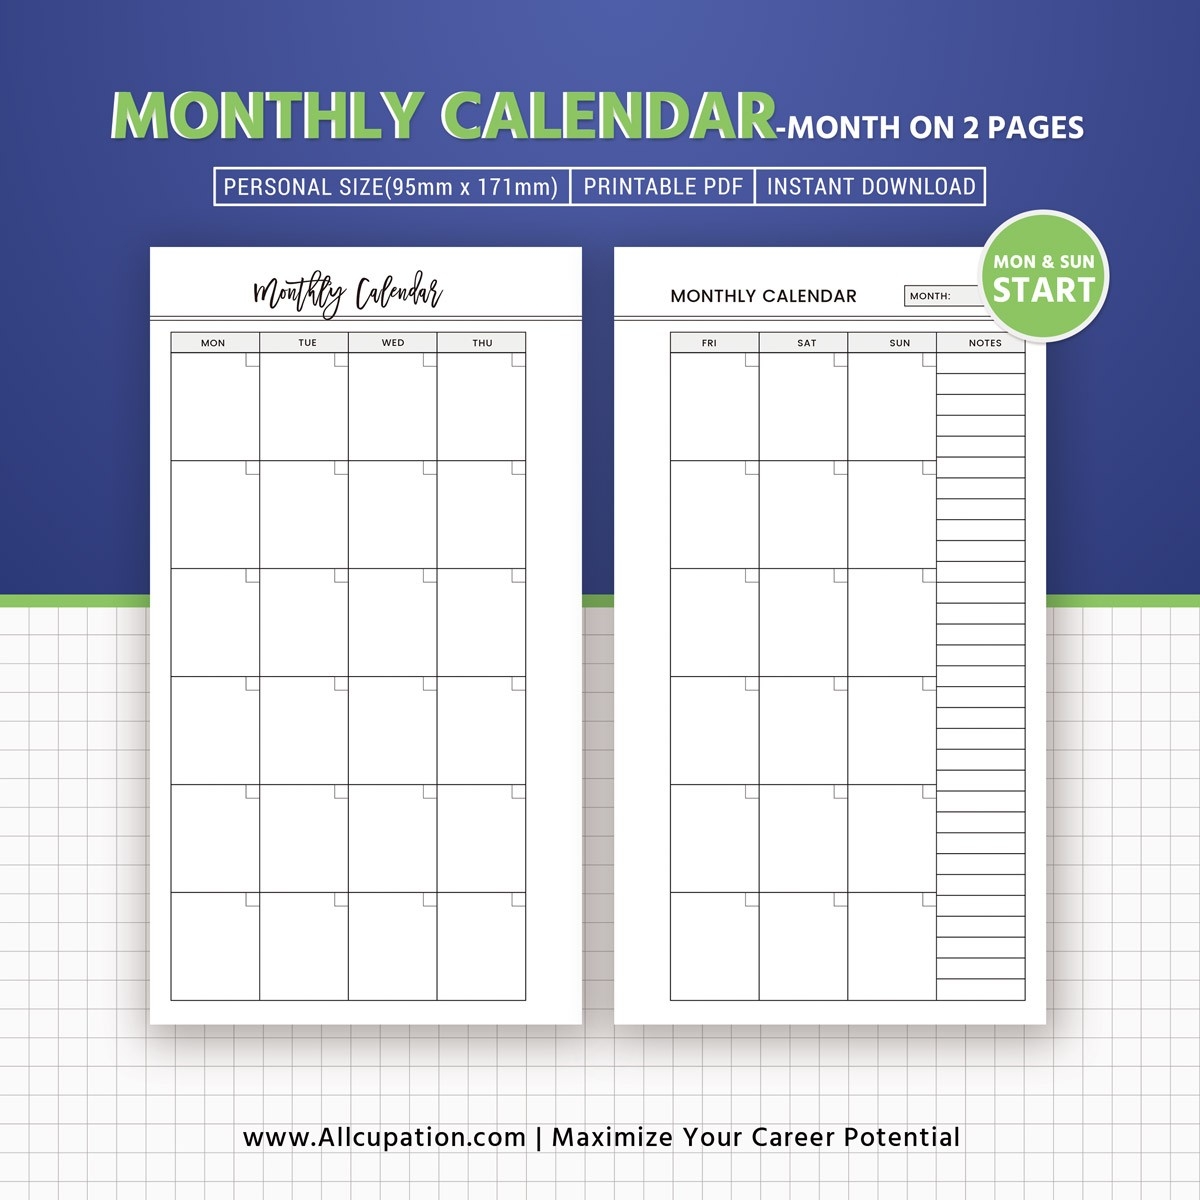 Monthly Calendar 2019, Month On 2 Pages, Printable Personal Size, Planner  Inserts, Planner Design, Best Planner, Filofax Personal, Instant Download-Blank Monthly Calendar Template 2 Page